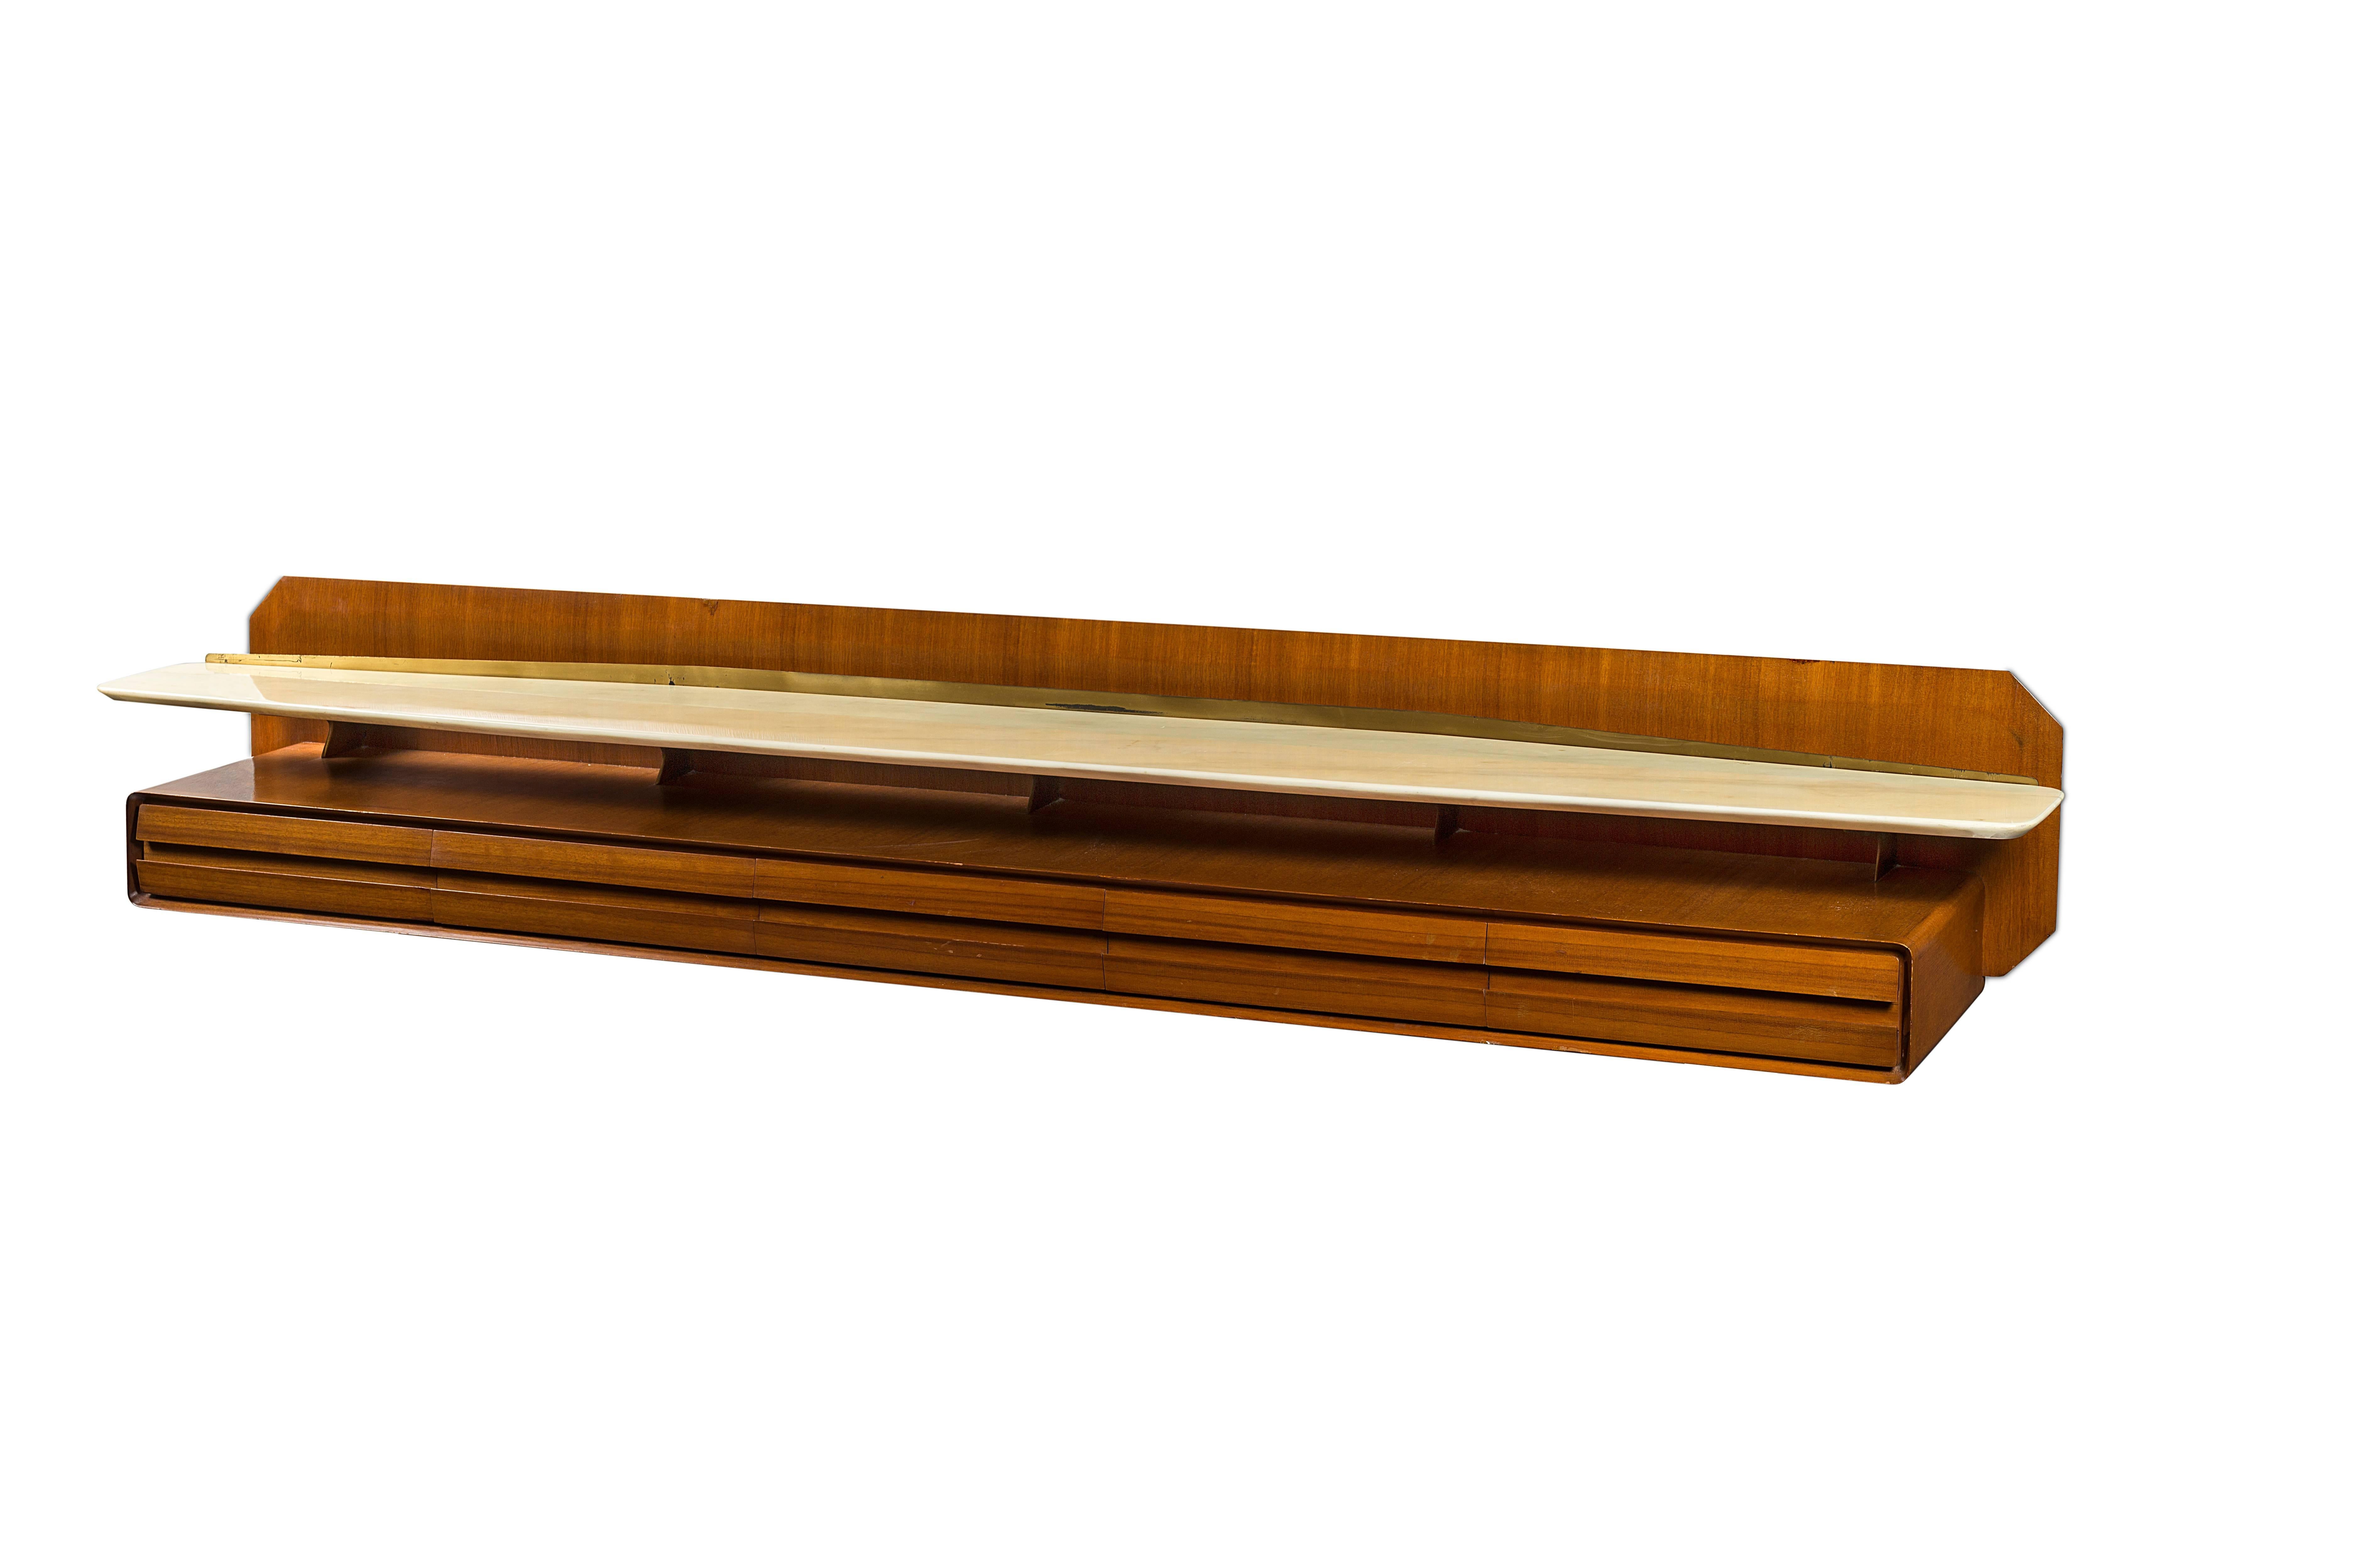 Gio Ponti, 1891-1979,
Italy.

Important : vintage collector's item for sale with guaranteed authenticity. 
Console, circa 1950.
Wood with veneer, marble, brass.

Expertise Gio Ponti Archive 14074/000

Measures: 37.5 x 250.5 x 37 cm.